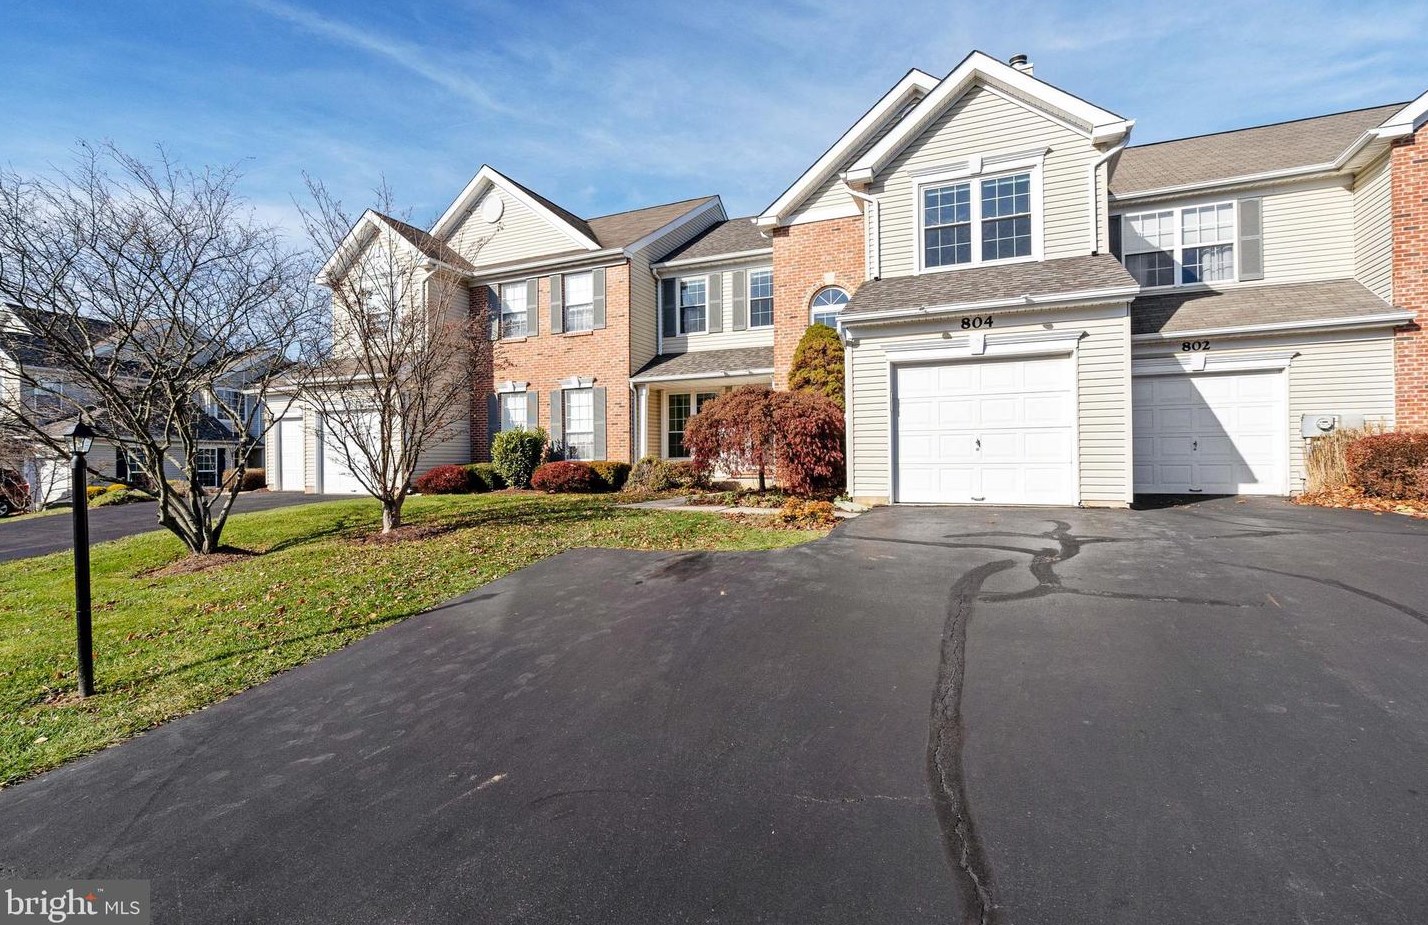 804 Long Meadow Dr, Chalfont, PA